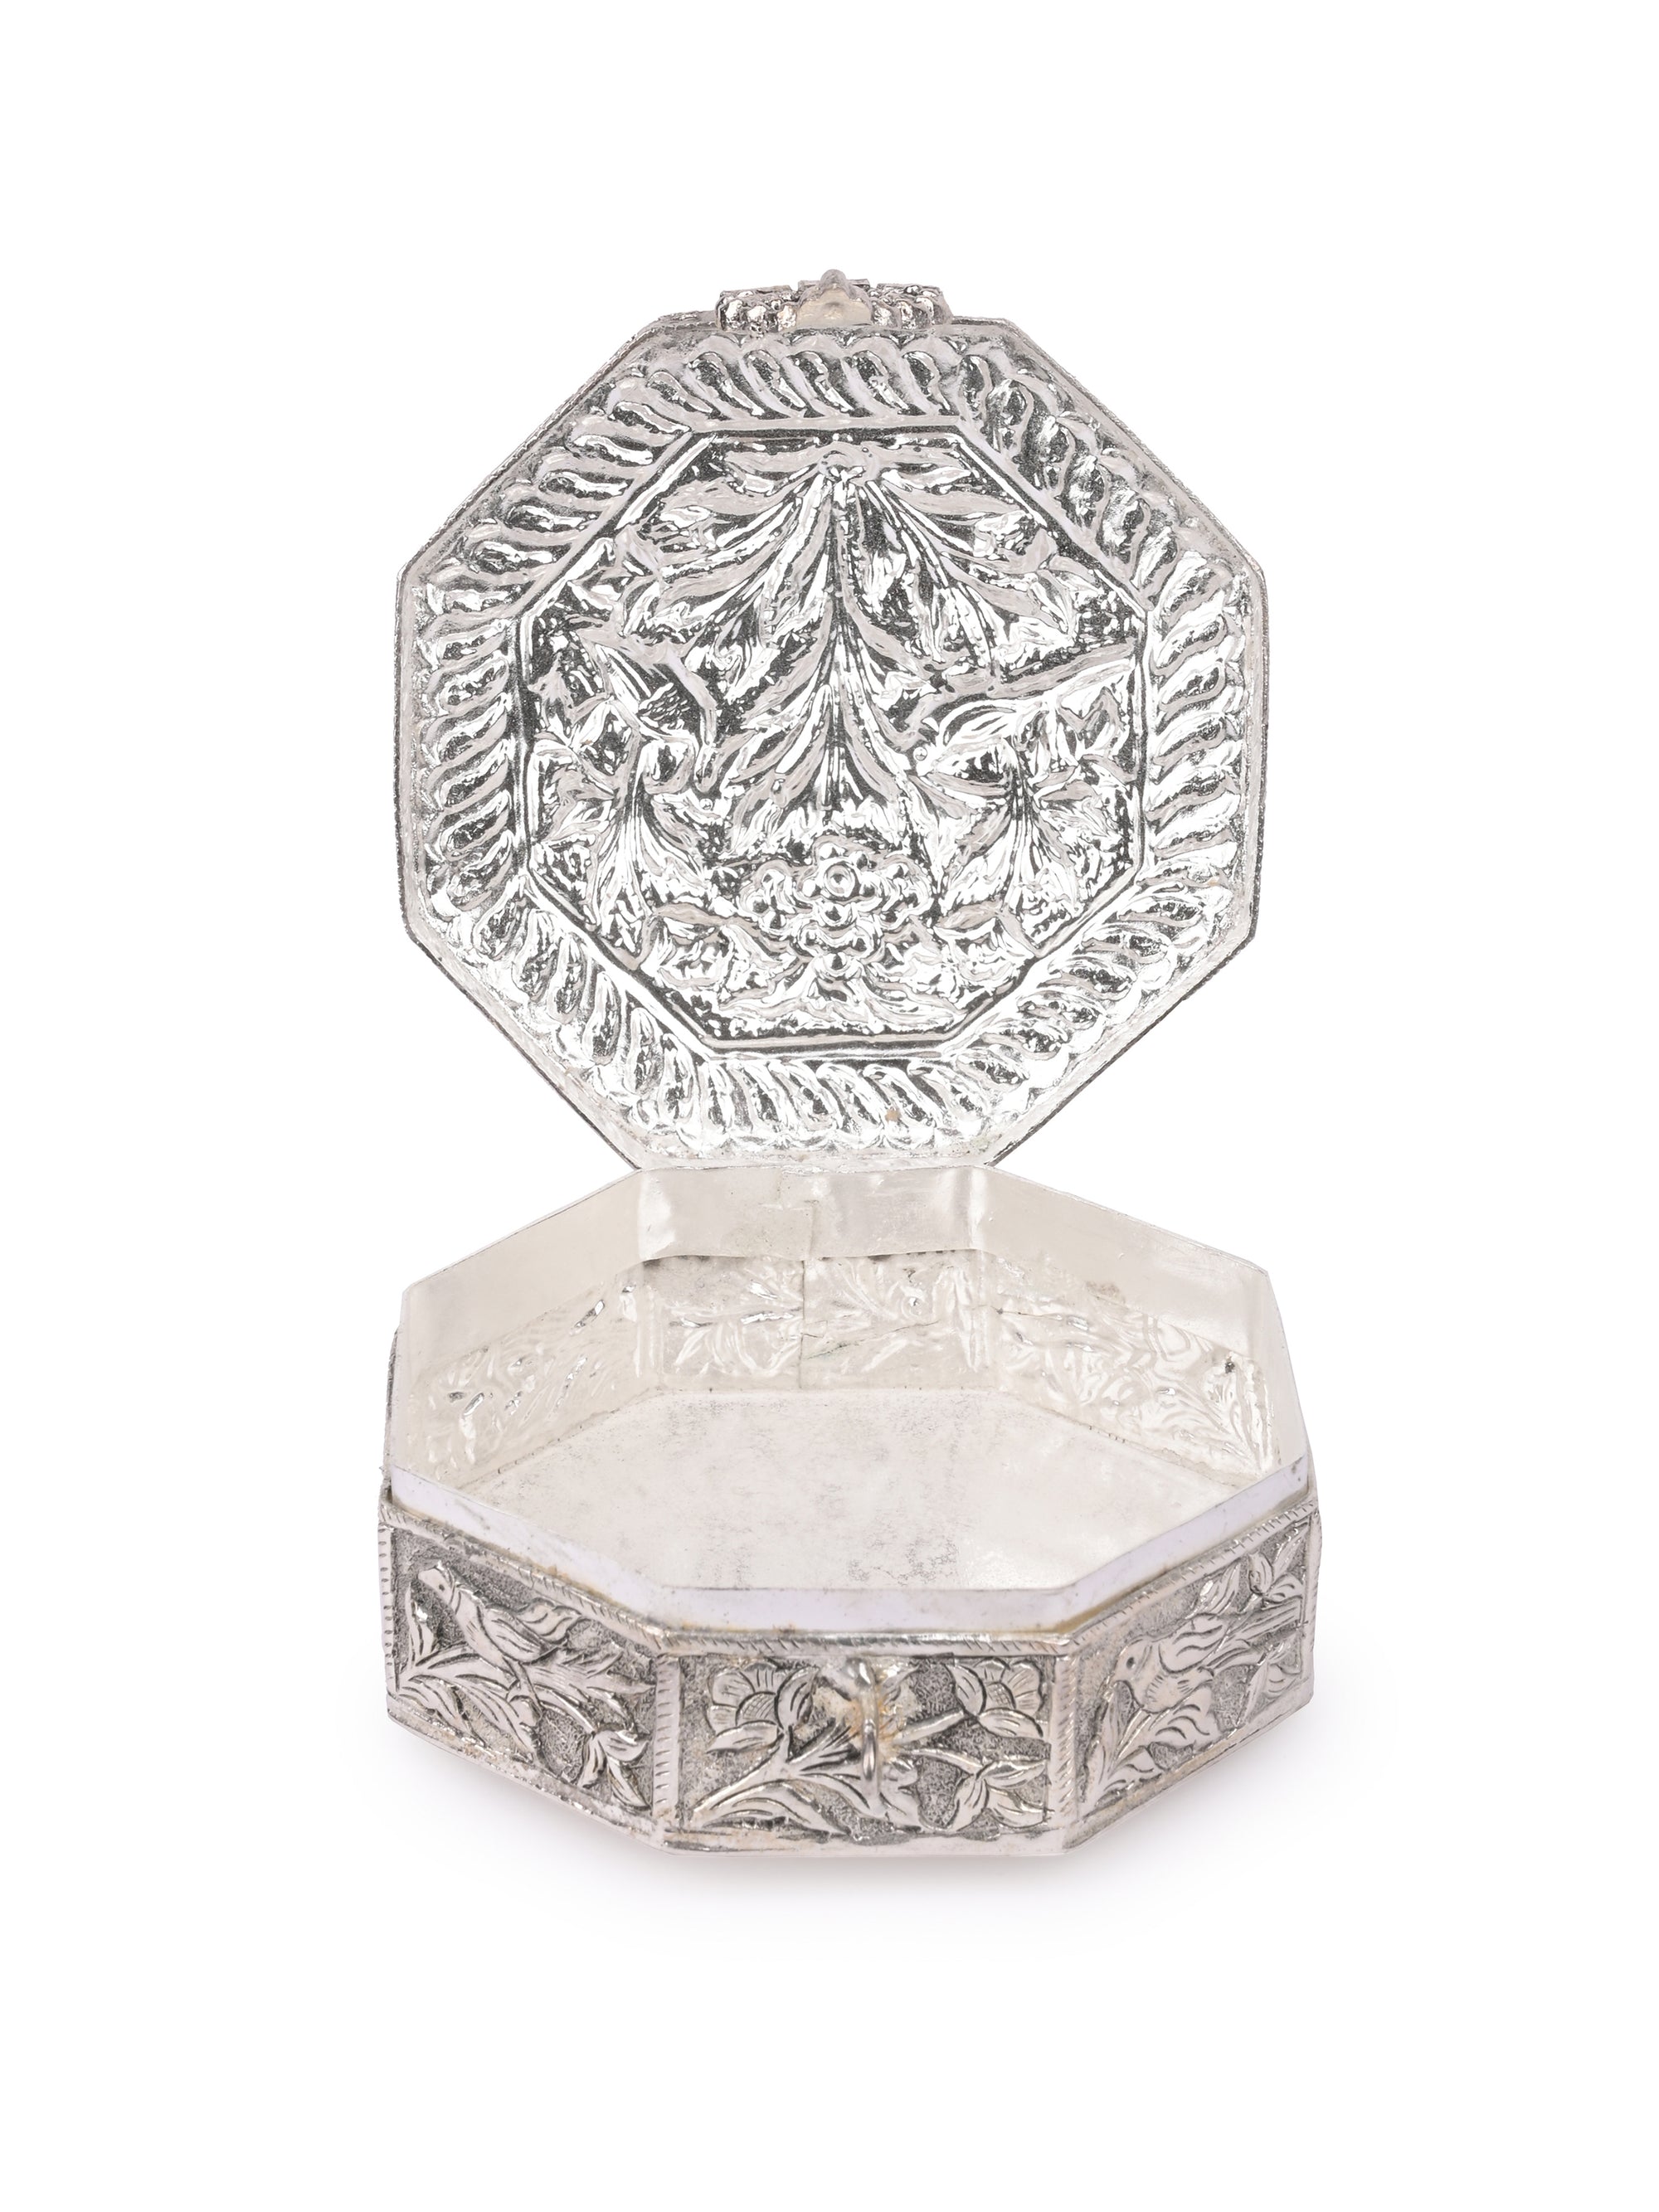 Hand crafted, Silver oxidised, Hexagonal Jewellery / Trinket box - The Heritage Artifacts